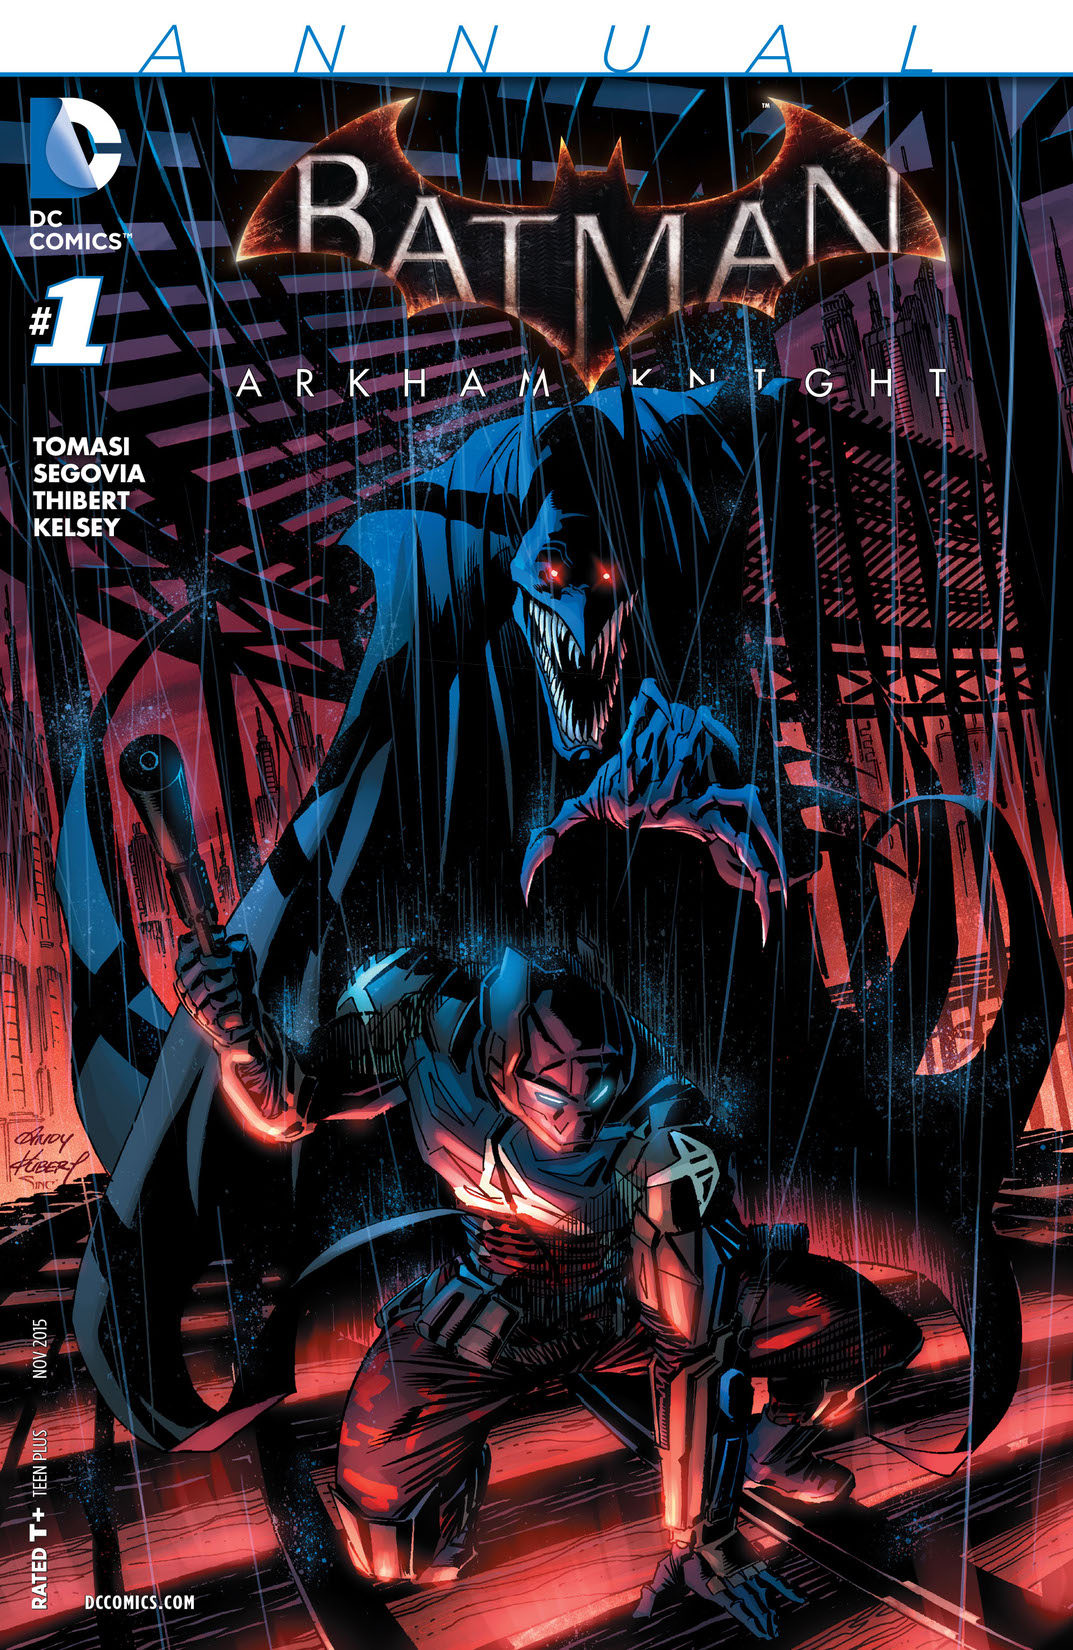 Batman: Arkham Knight Annual #1 preview images